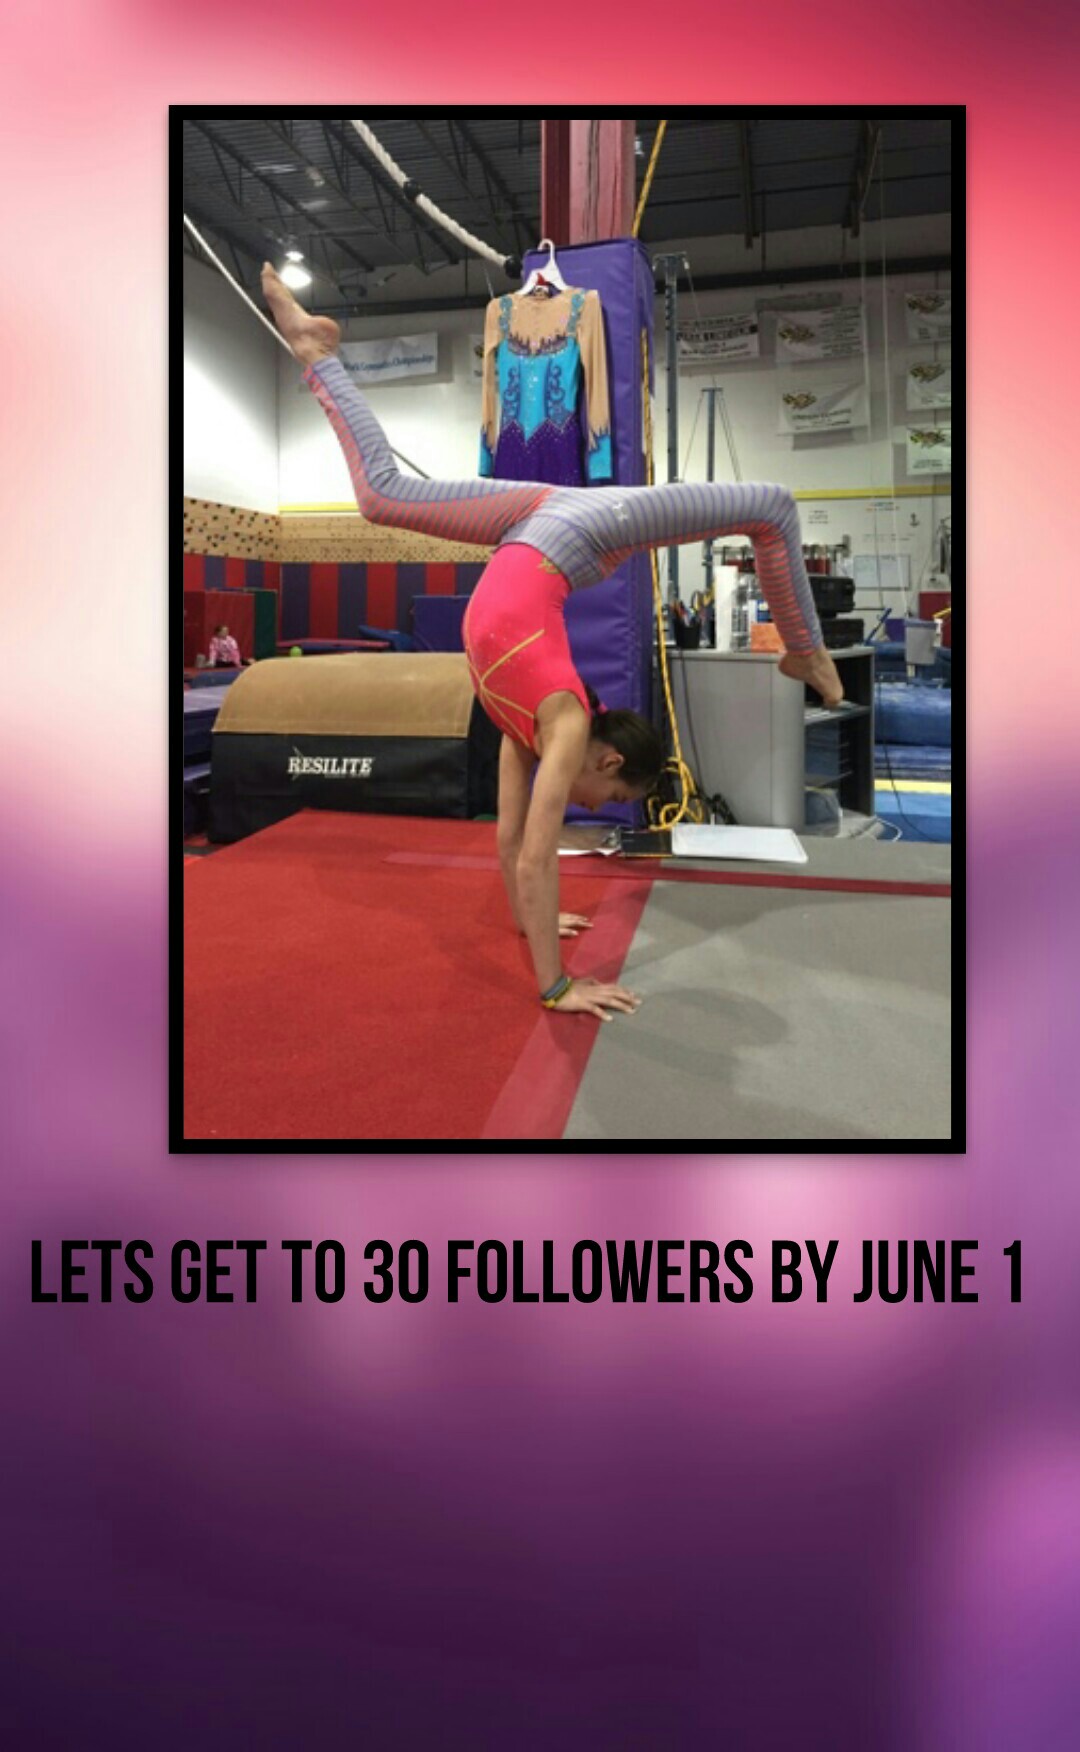 Lets get to 30 followers by June 1